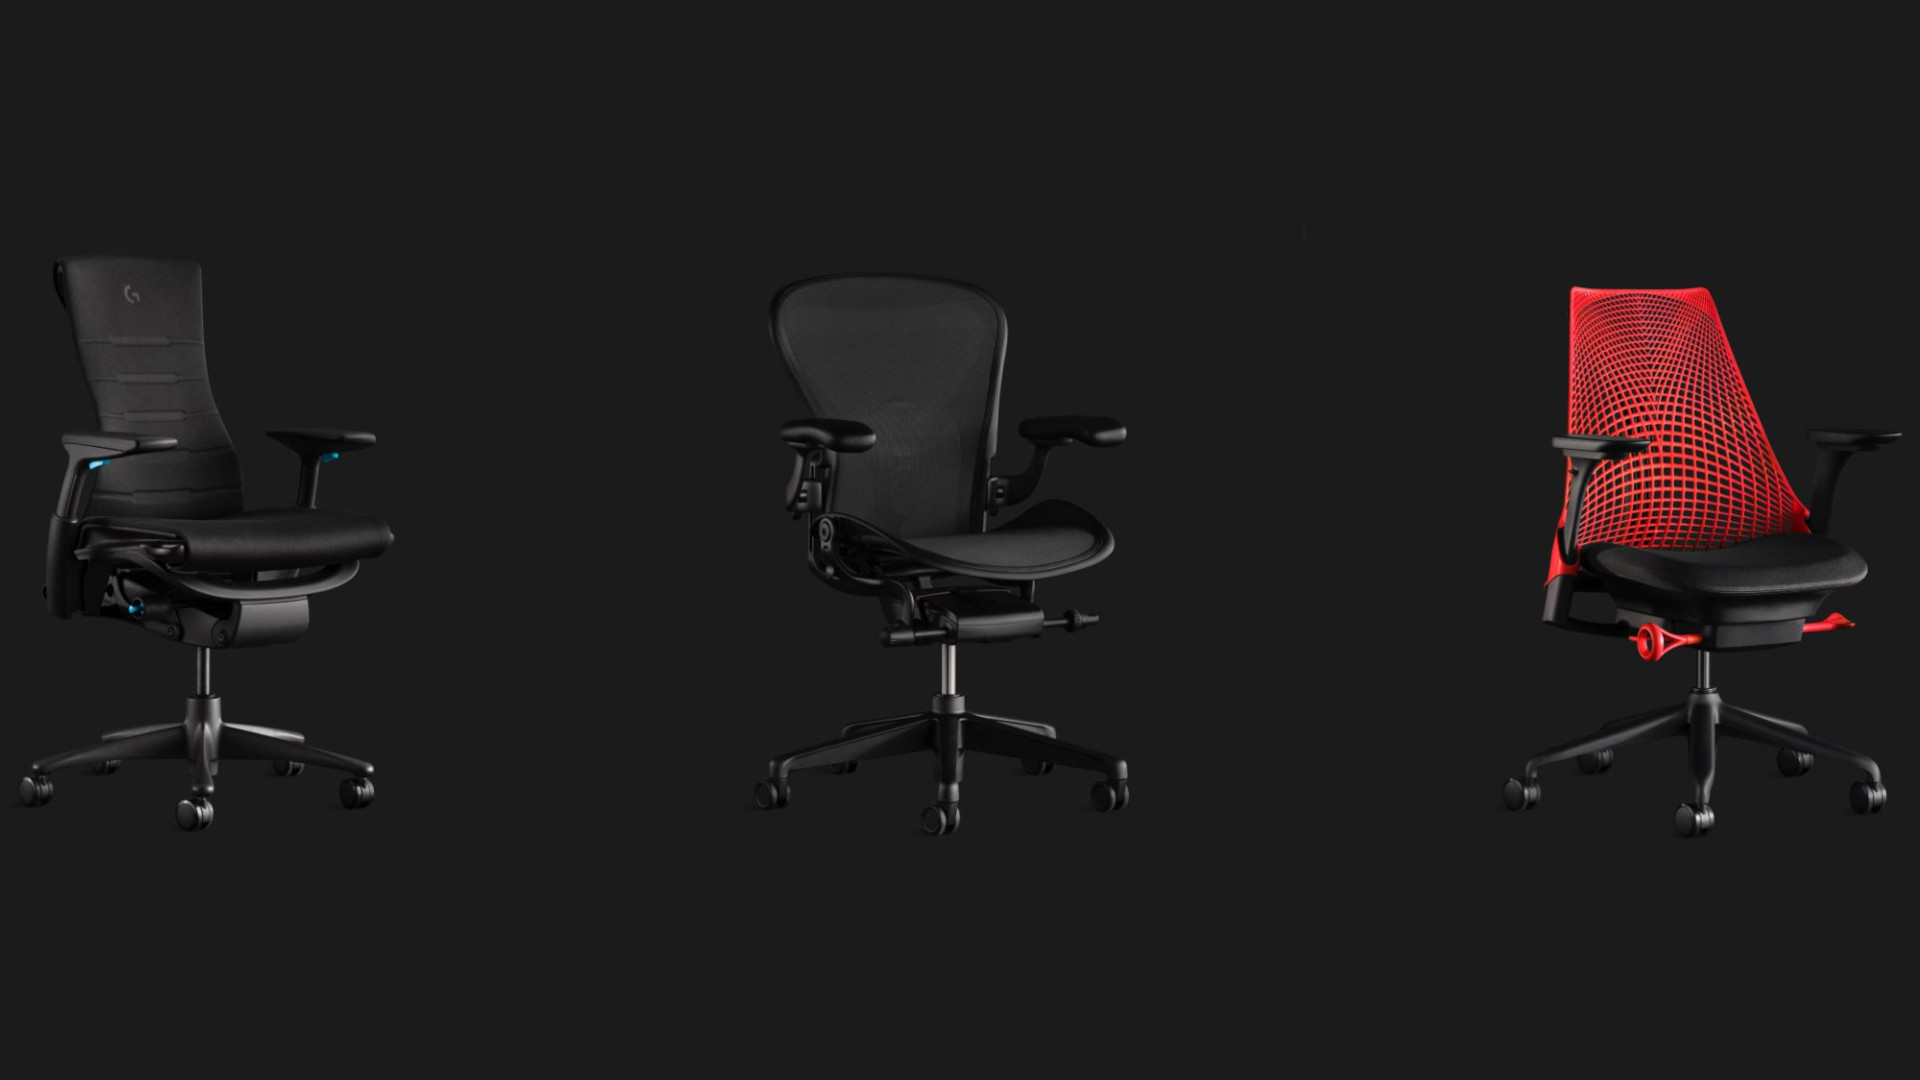 Herman miller gaming chairs on a grey backdrop